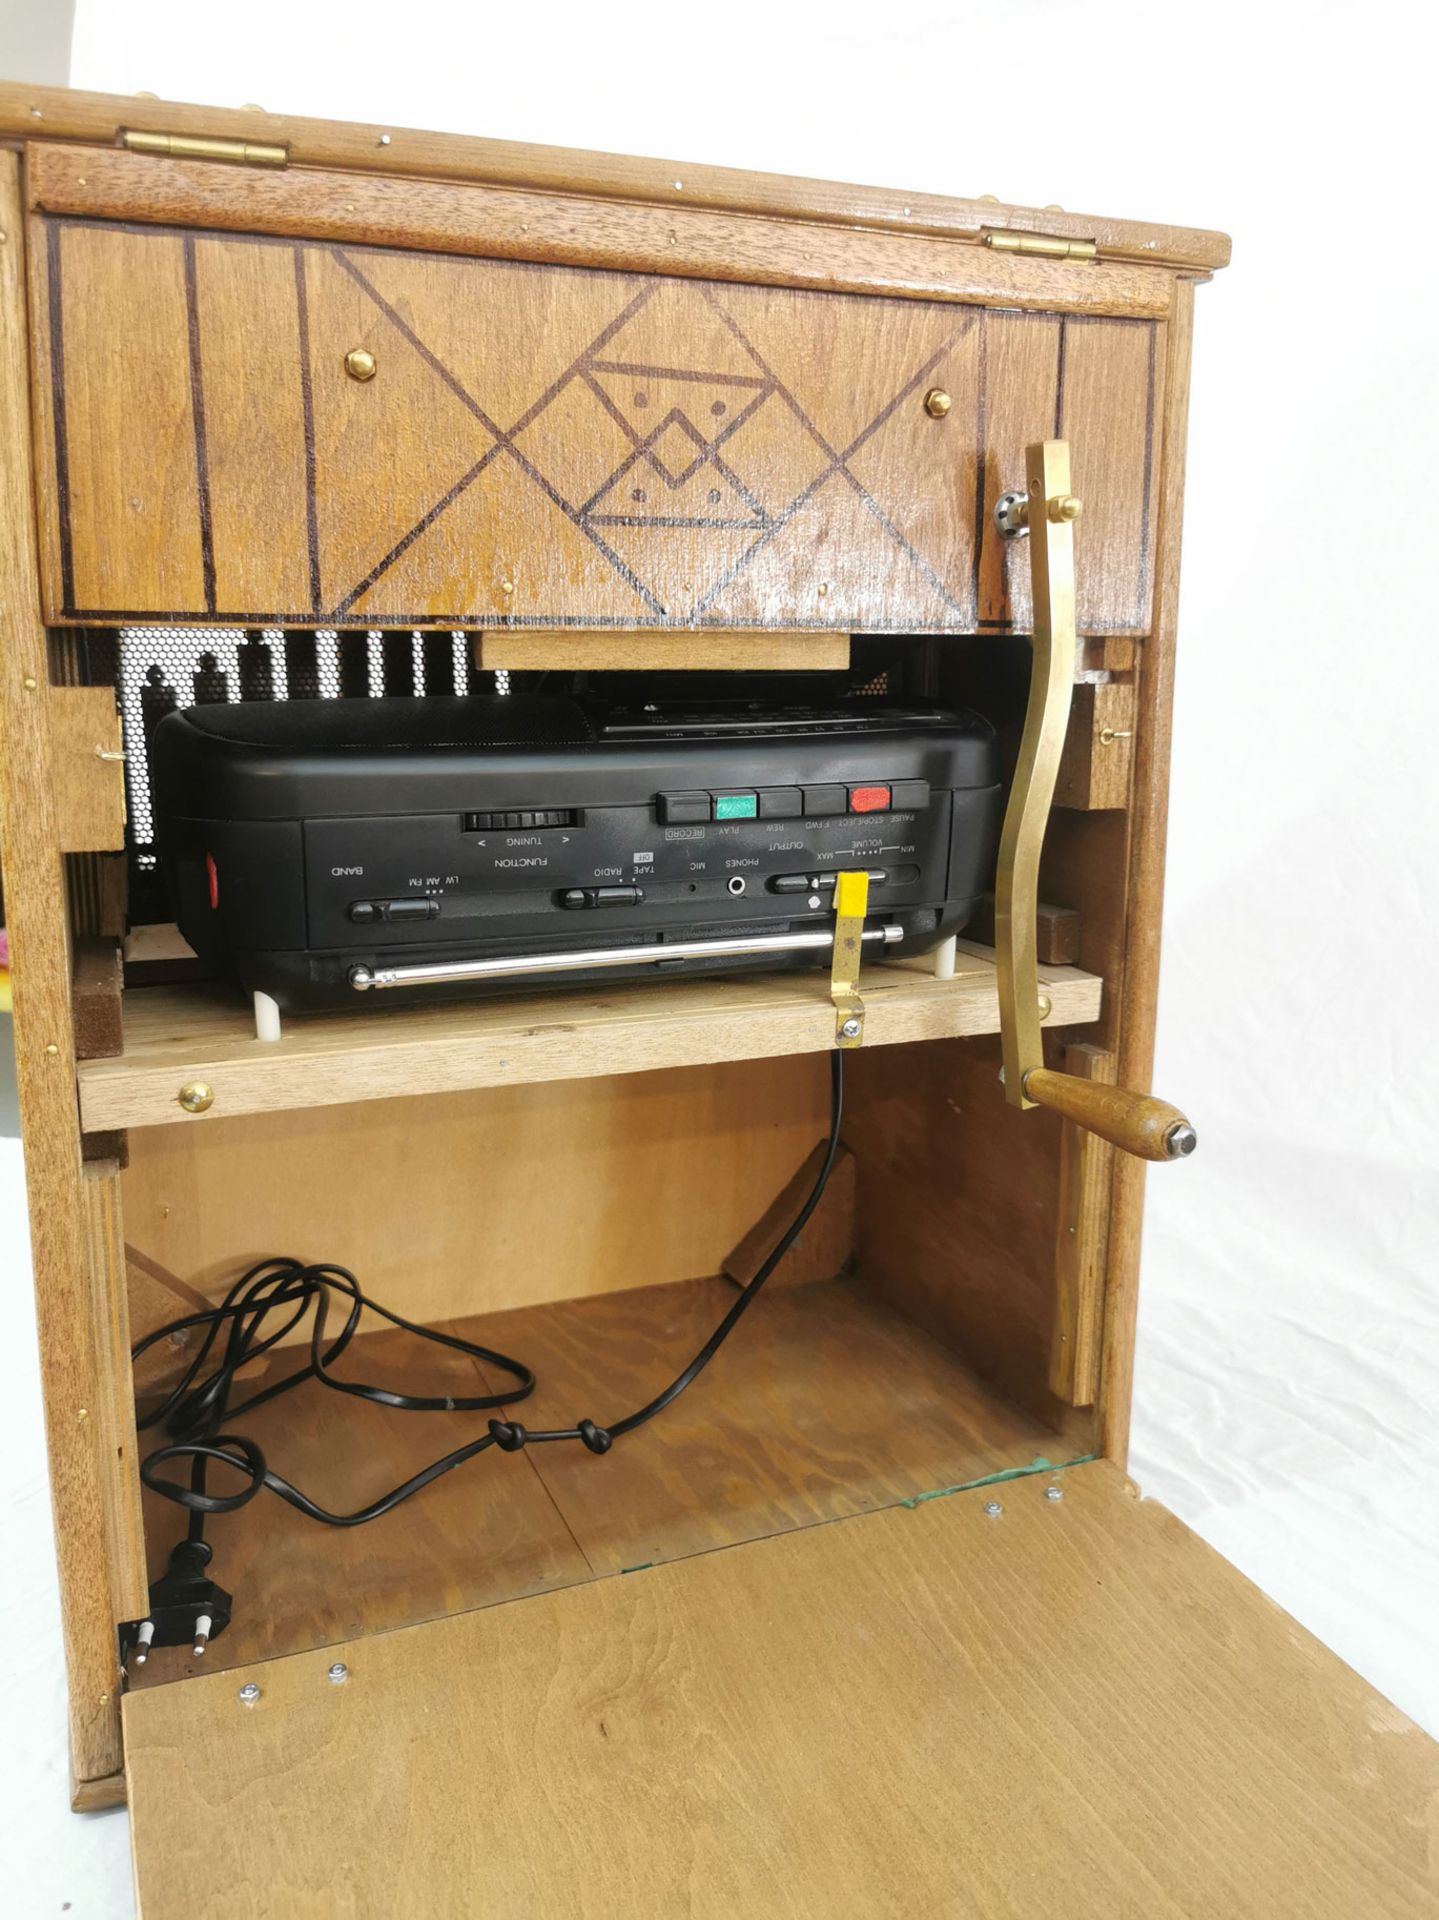 Barrel Organ Scale Model with Cassette Radio - Image 6 of 7